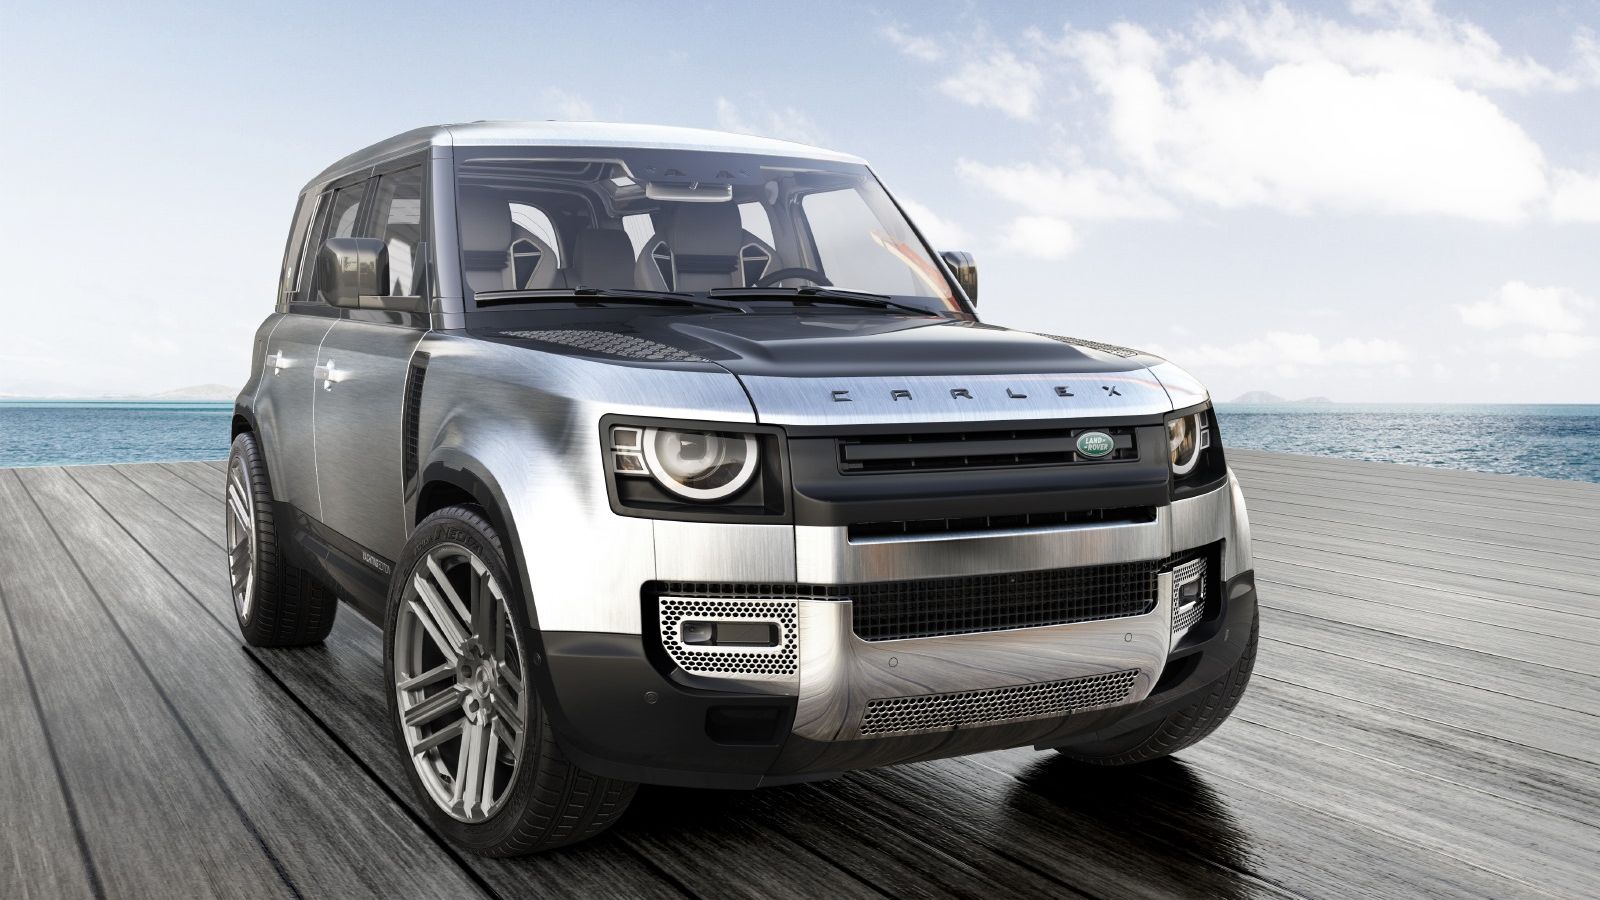 2020 Land Rover Defender Yachting Edition by Carlex Design